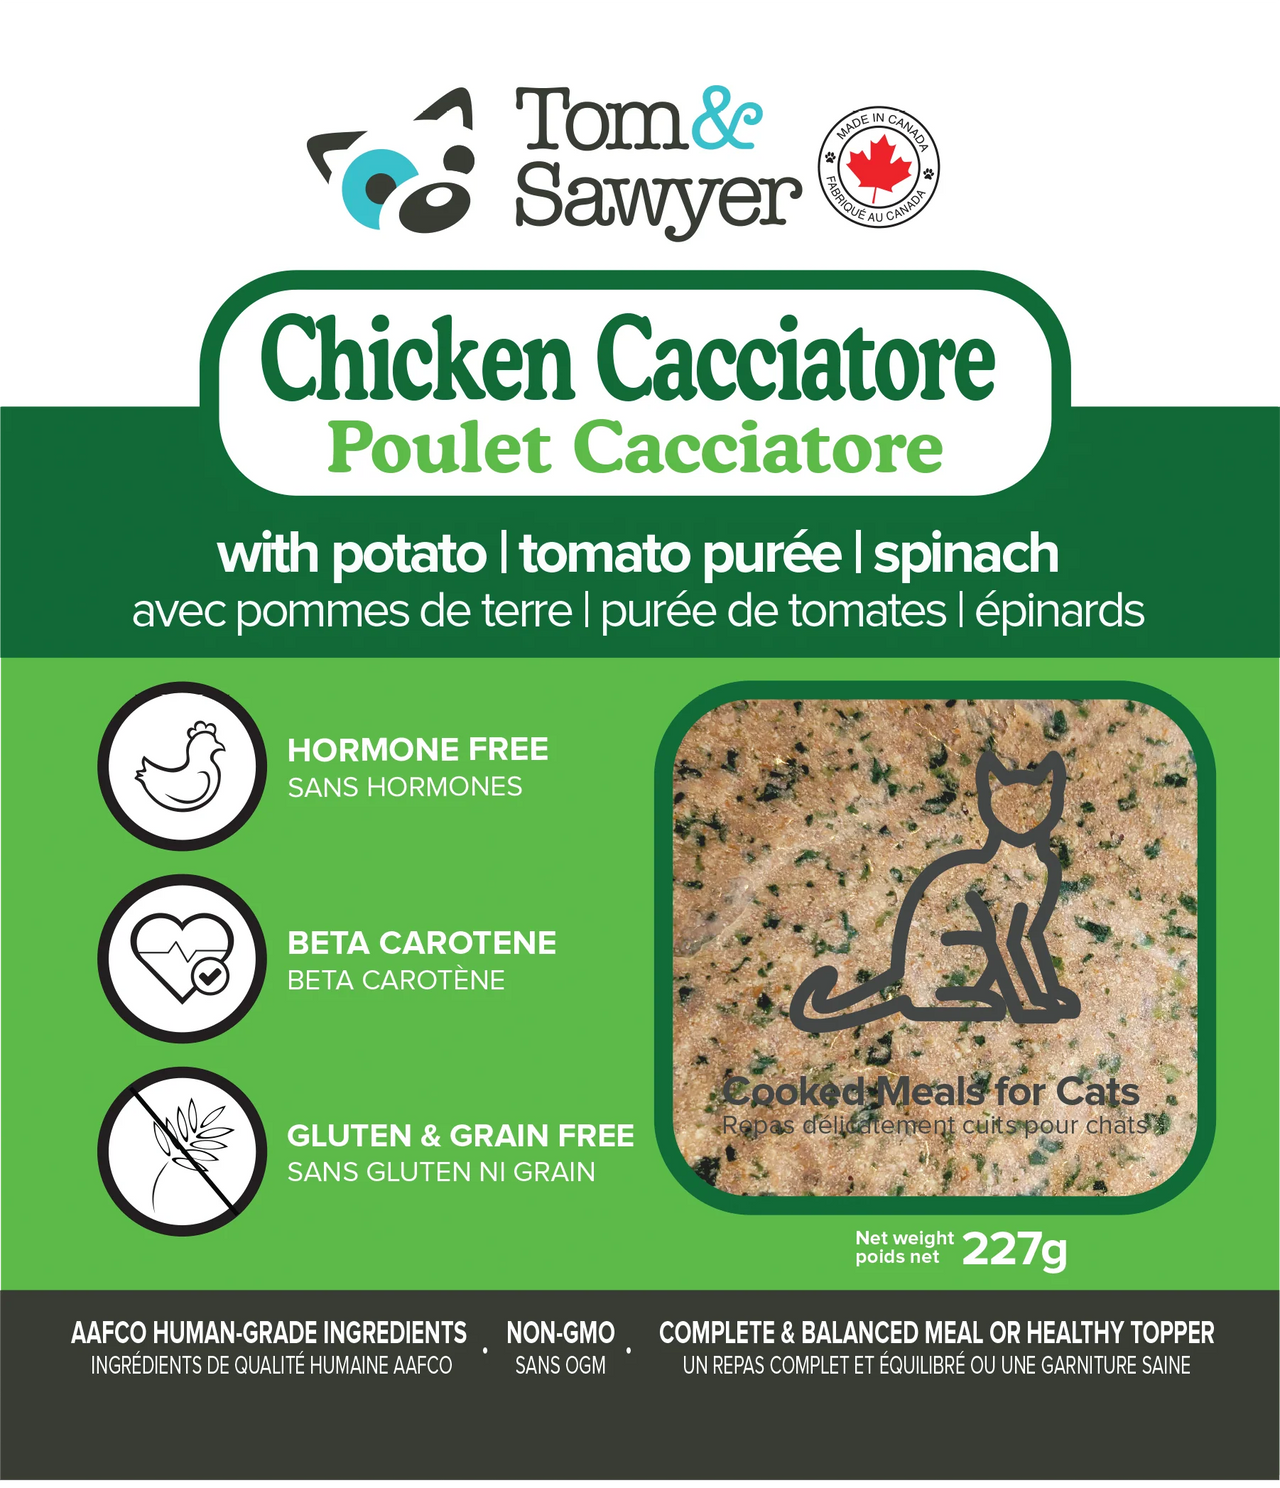 Tom & Sawyer Cat Gently Cooked Chicken Cacciatore